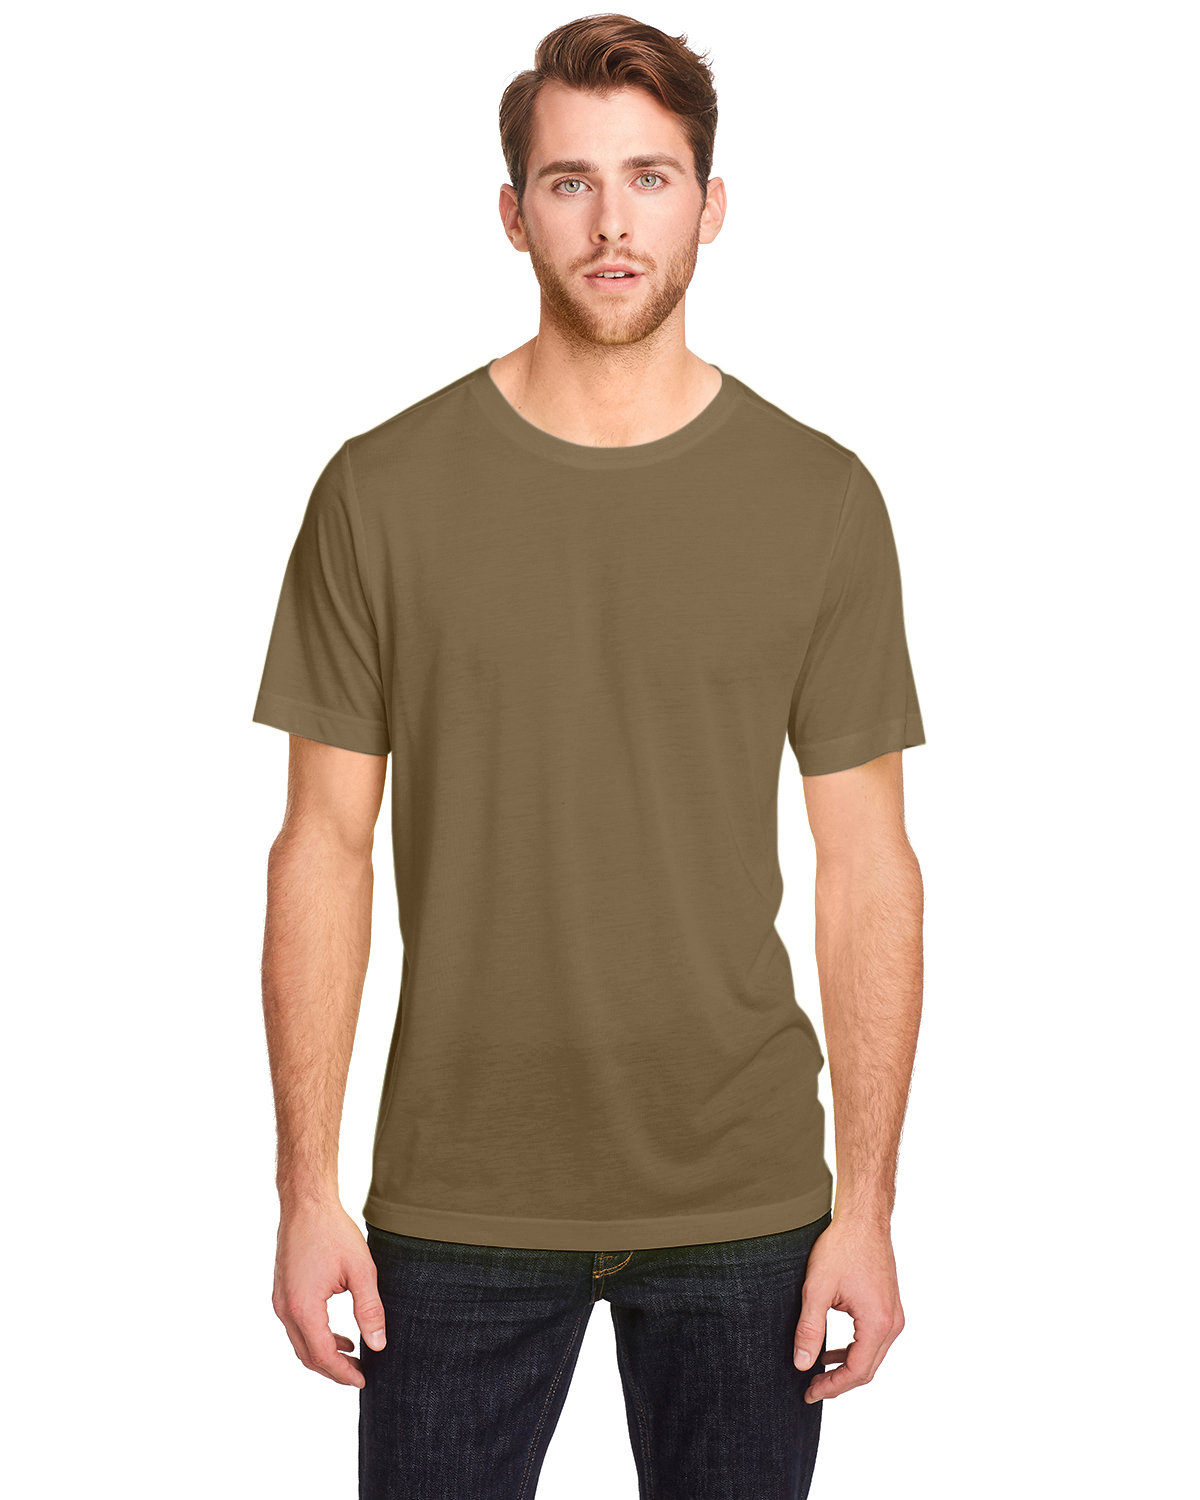 CORE365 Adult Fusion ChromaSoft Performance T-Shirt COYOTE BROWN 